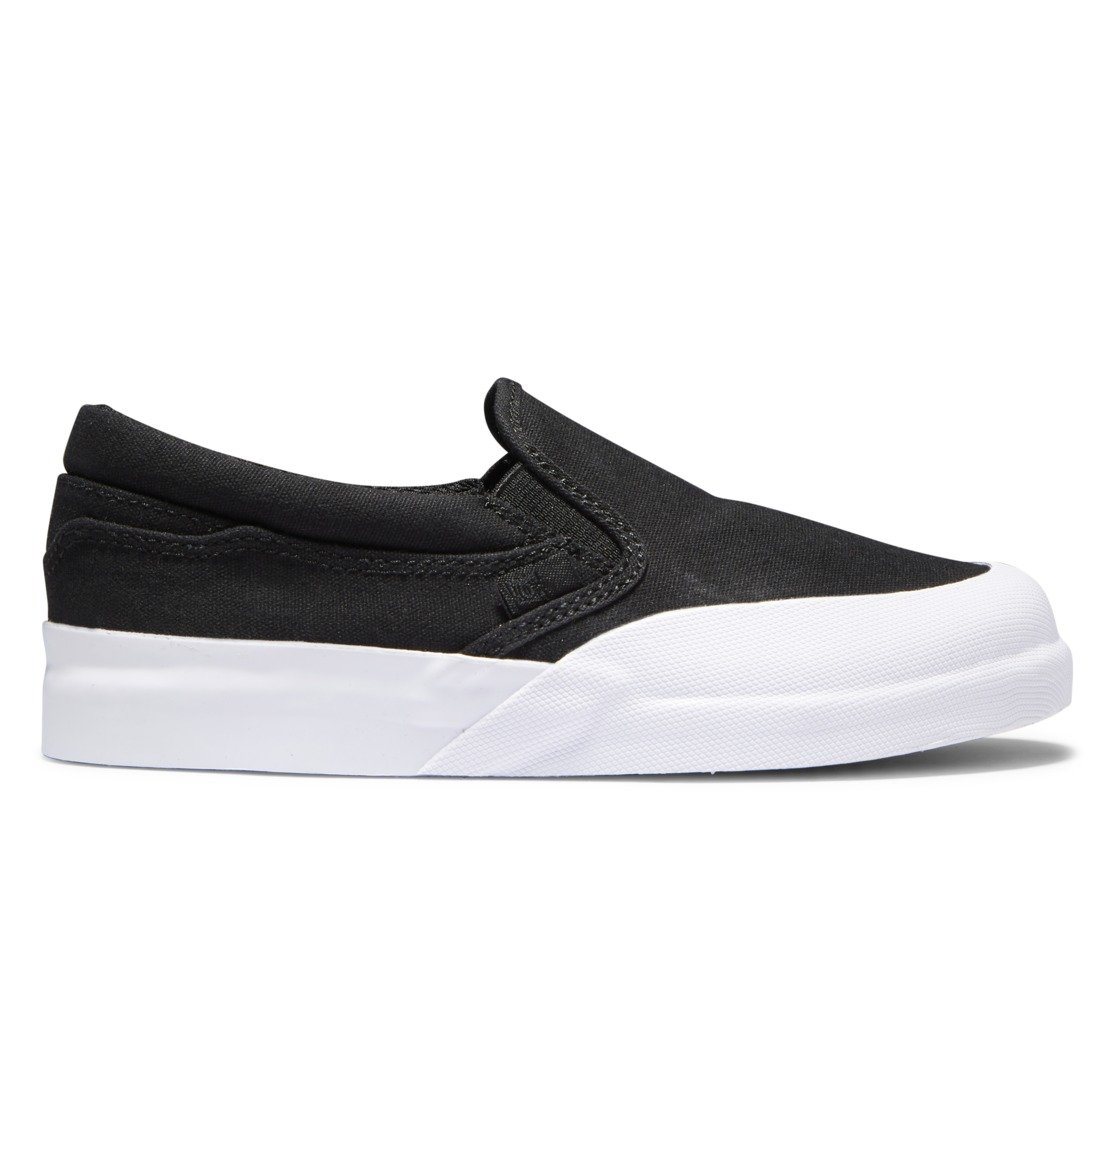 DC Infinite Slip On Shoes Youth Black/White FOOTWEAR - Youth and Toddler Skate Shoes DC 